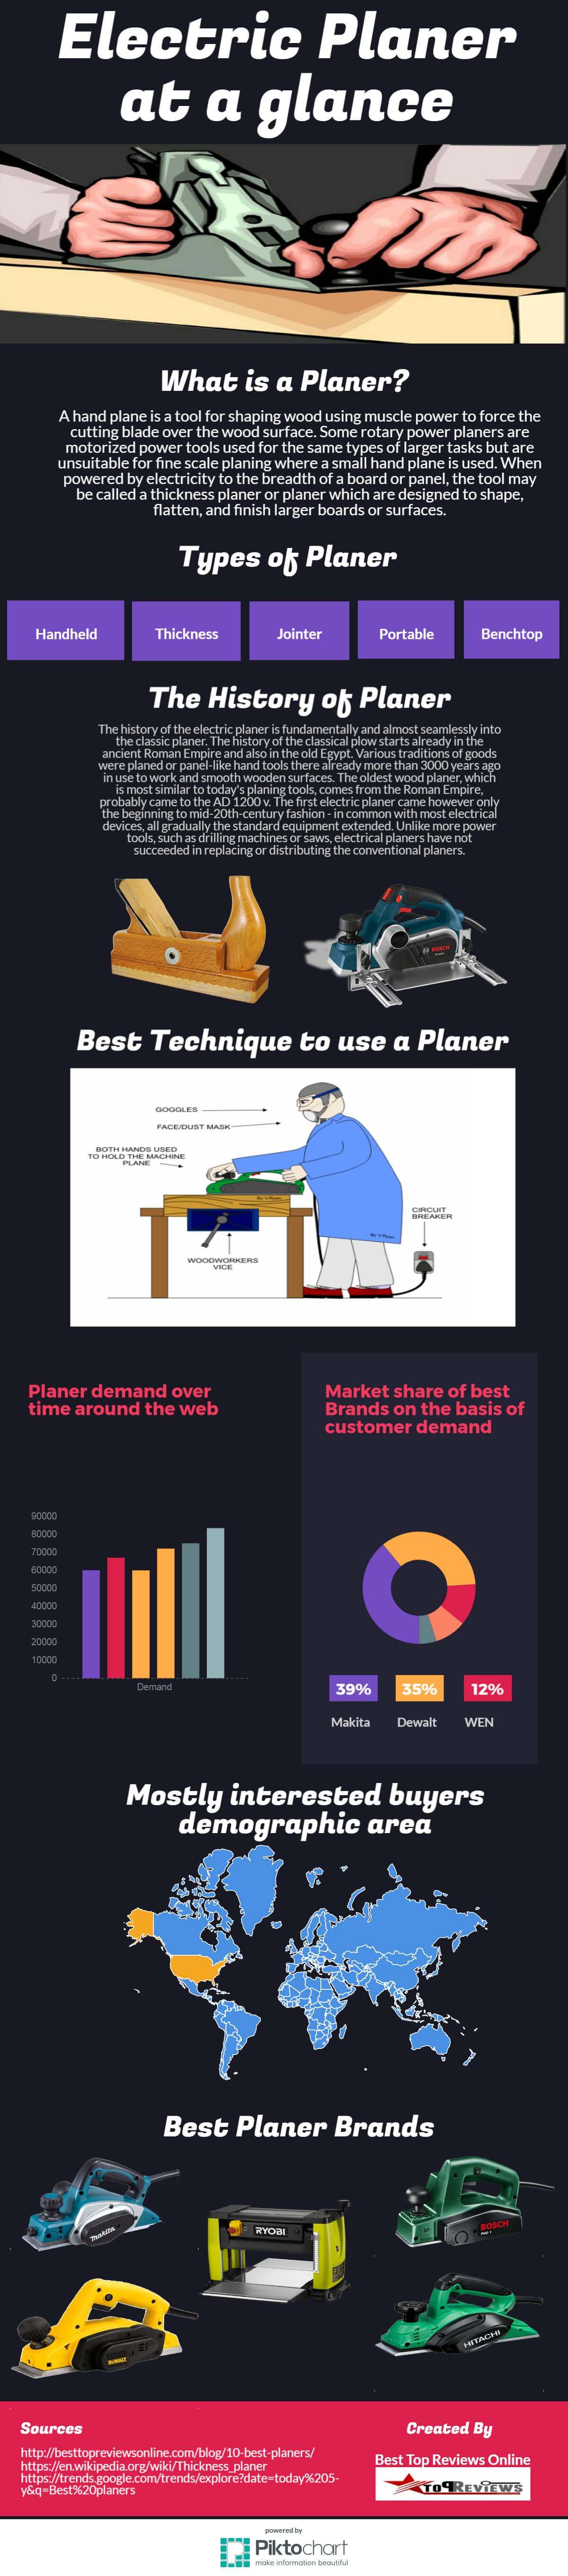 Planer at a glance